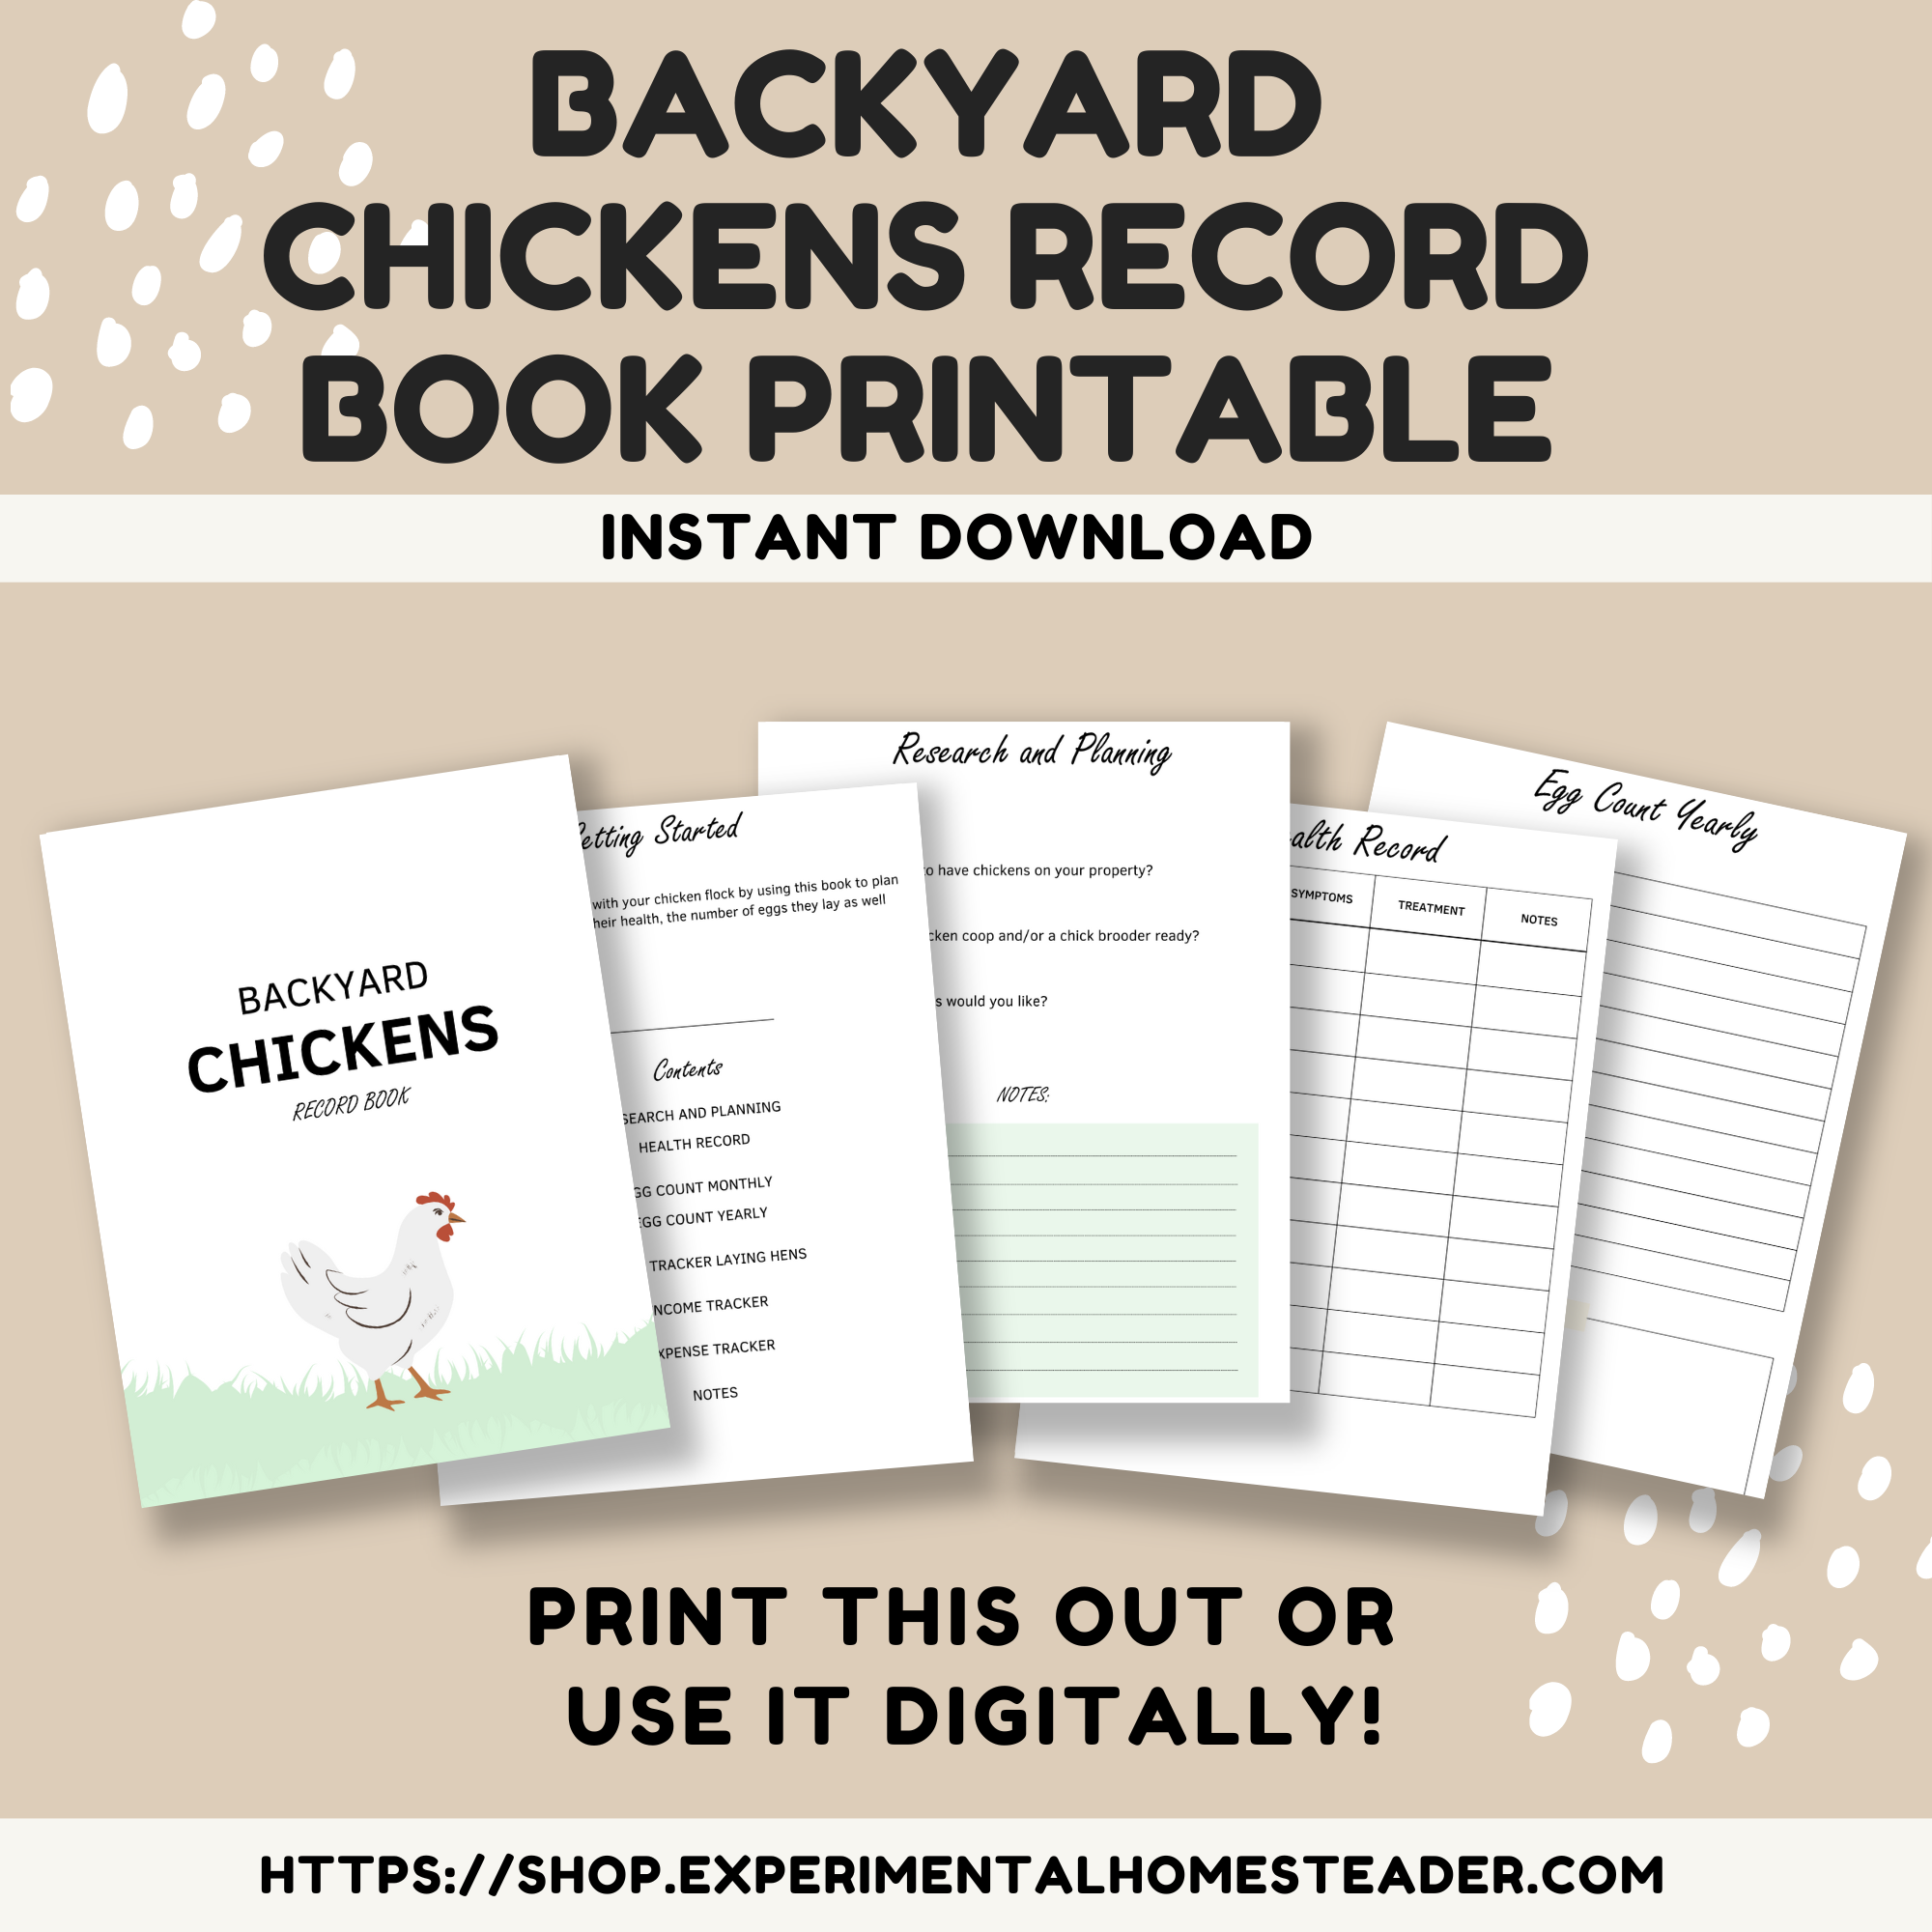 images of the backyard chicken binder